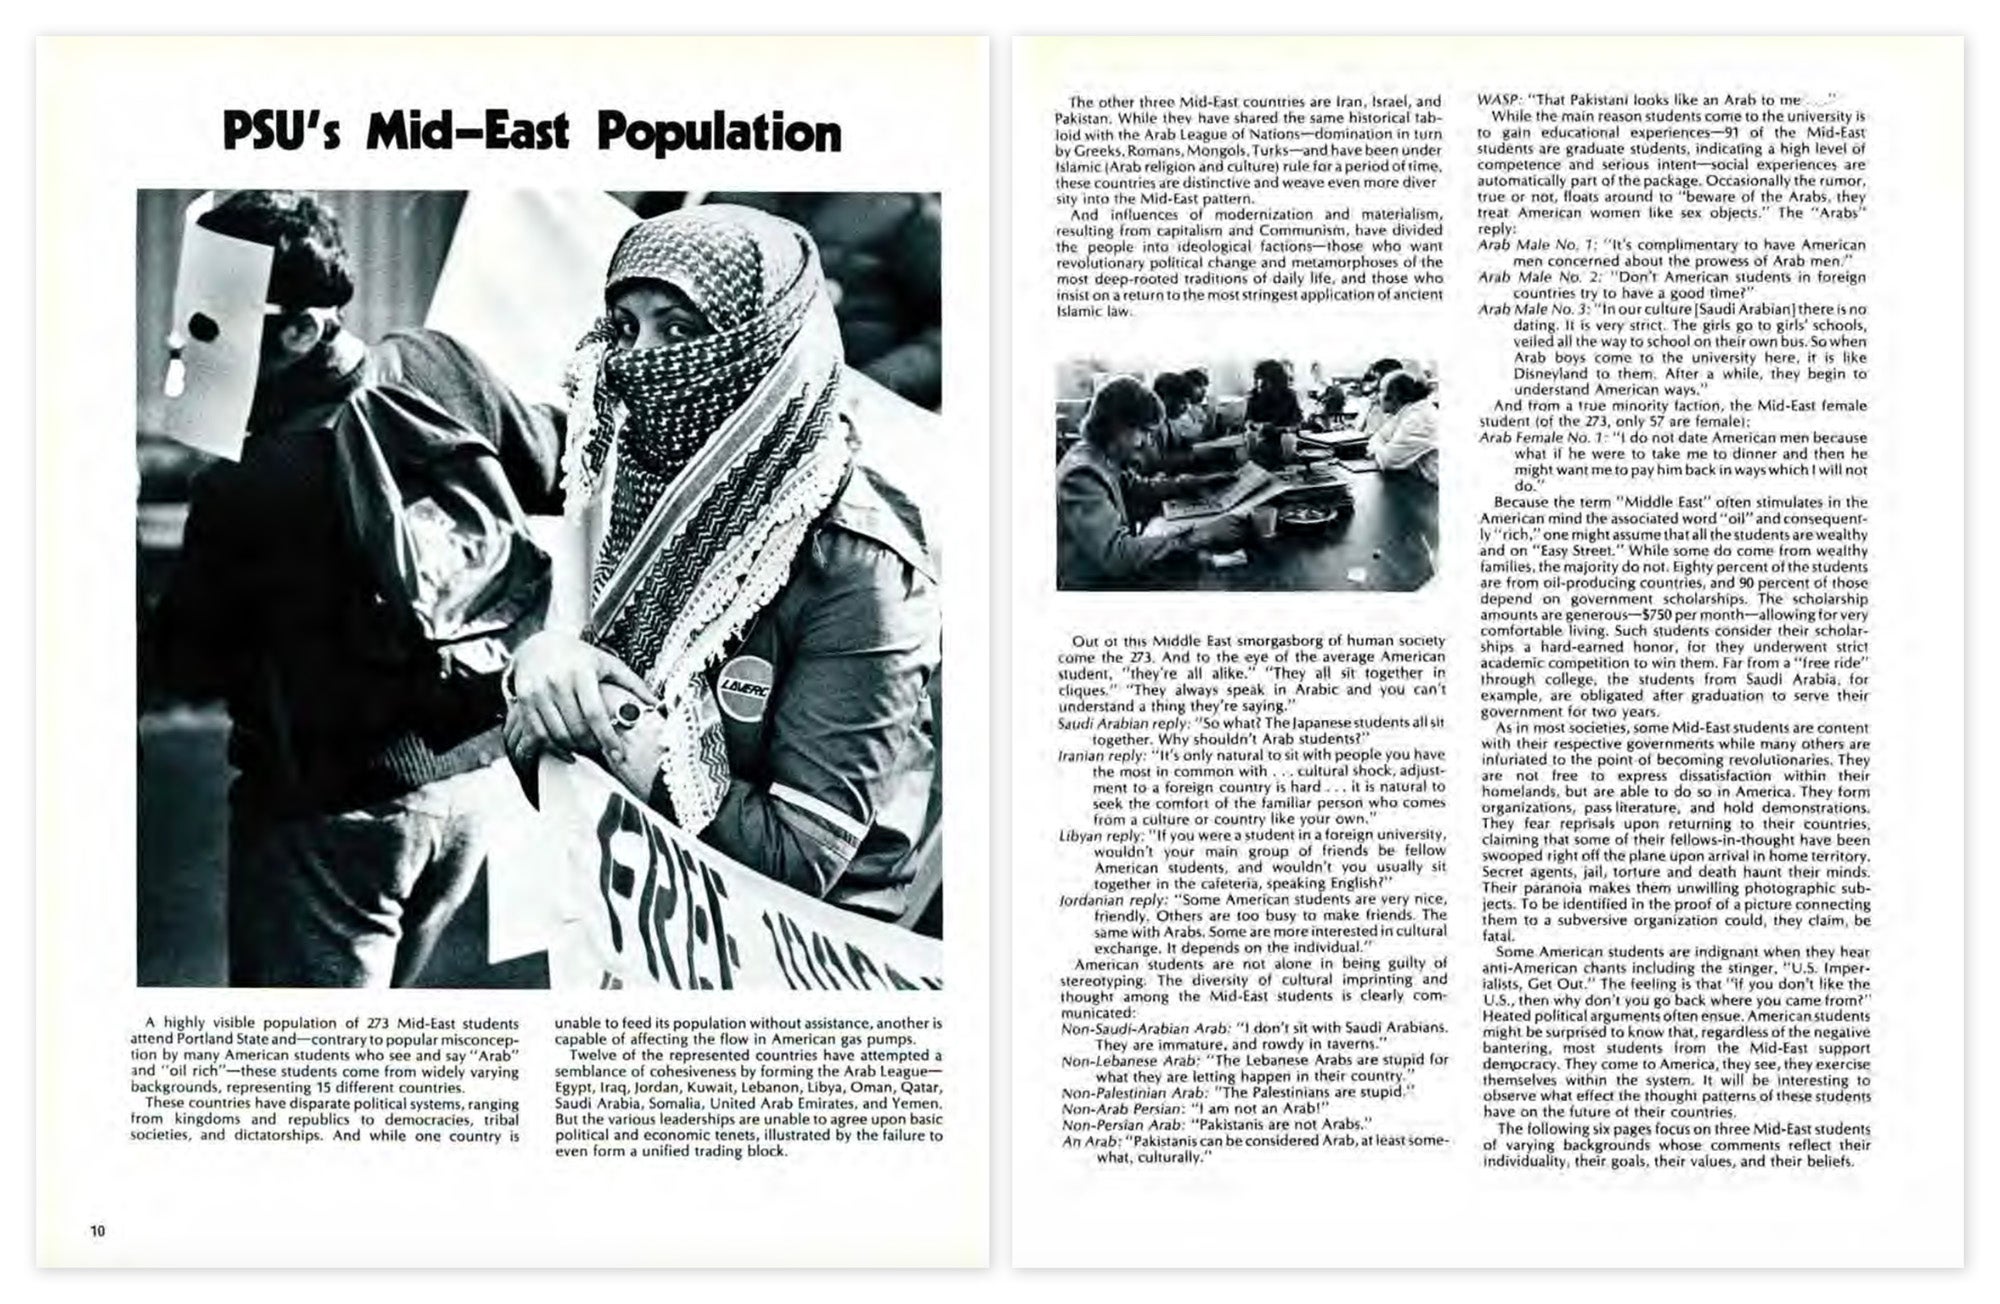 An article in a yearbook titled "PSU's Mid-East Population"